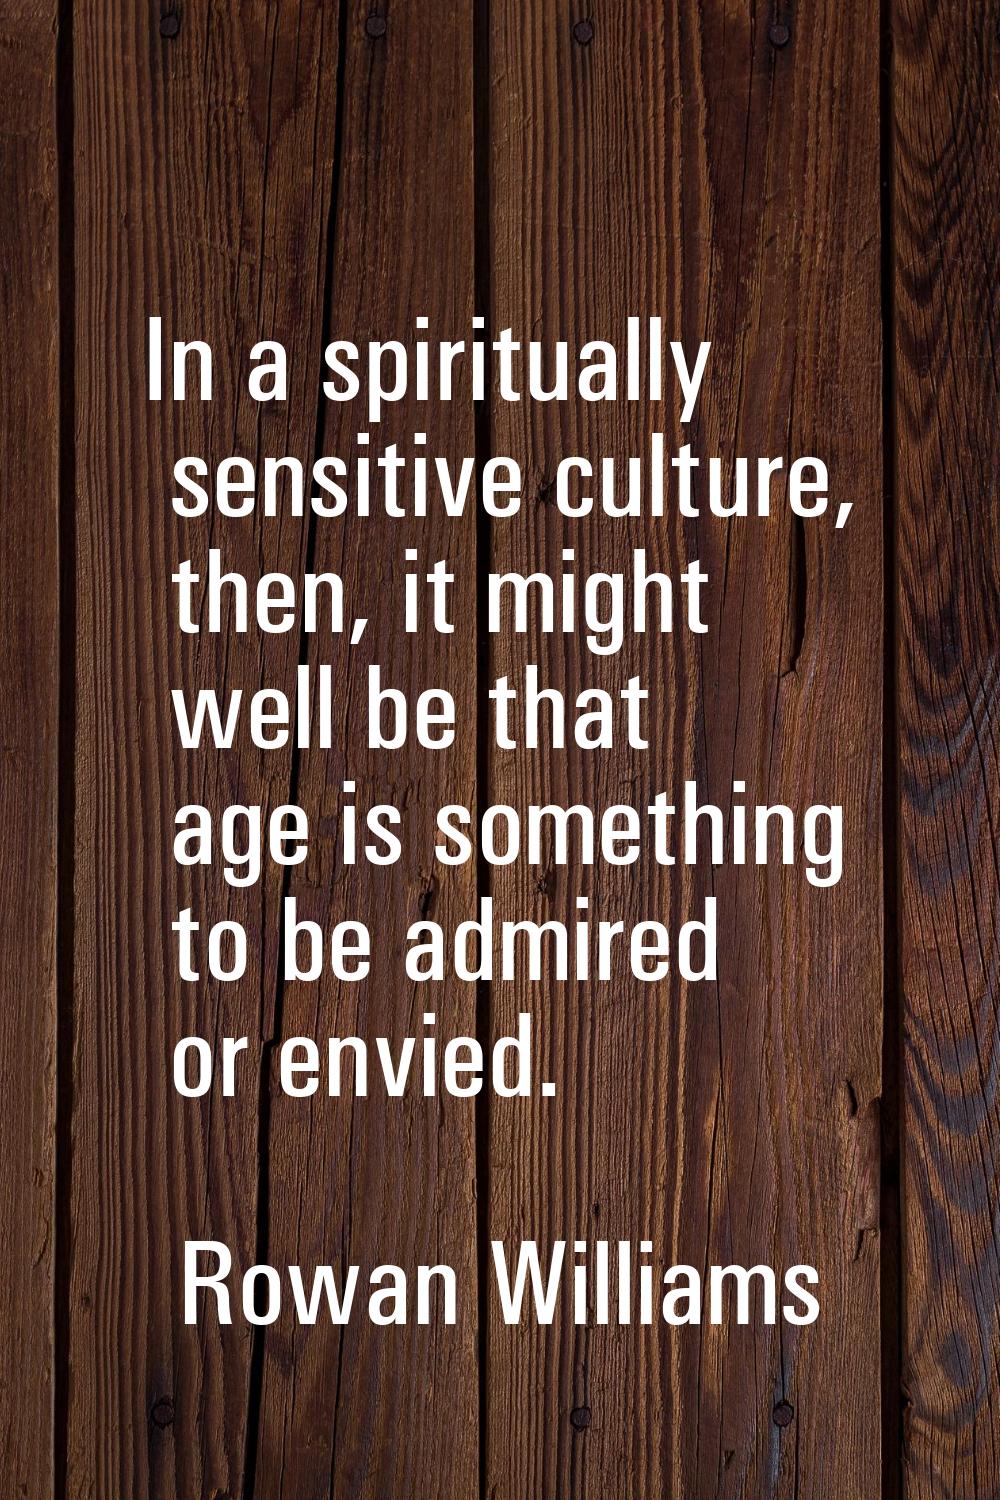 In a spiritually sensitive culture, then, it might well be that age is something to be admired or e